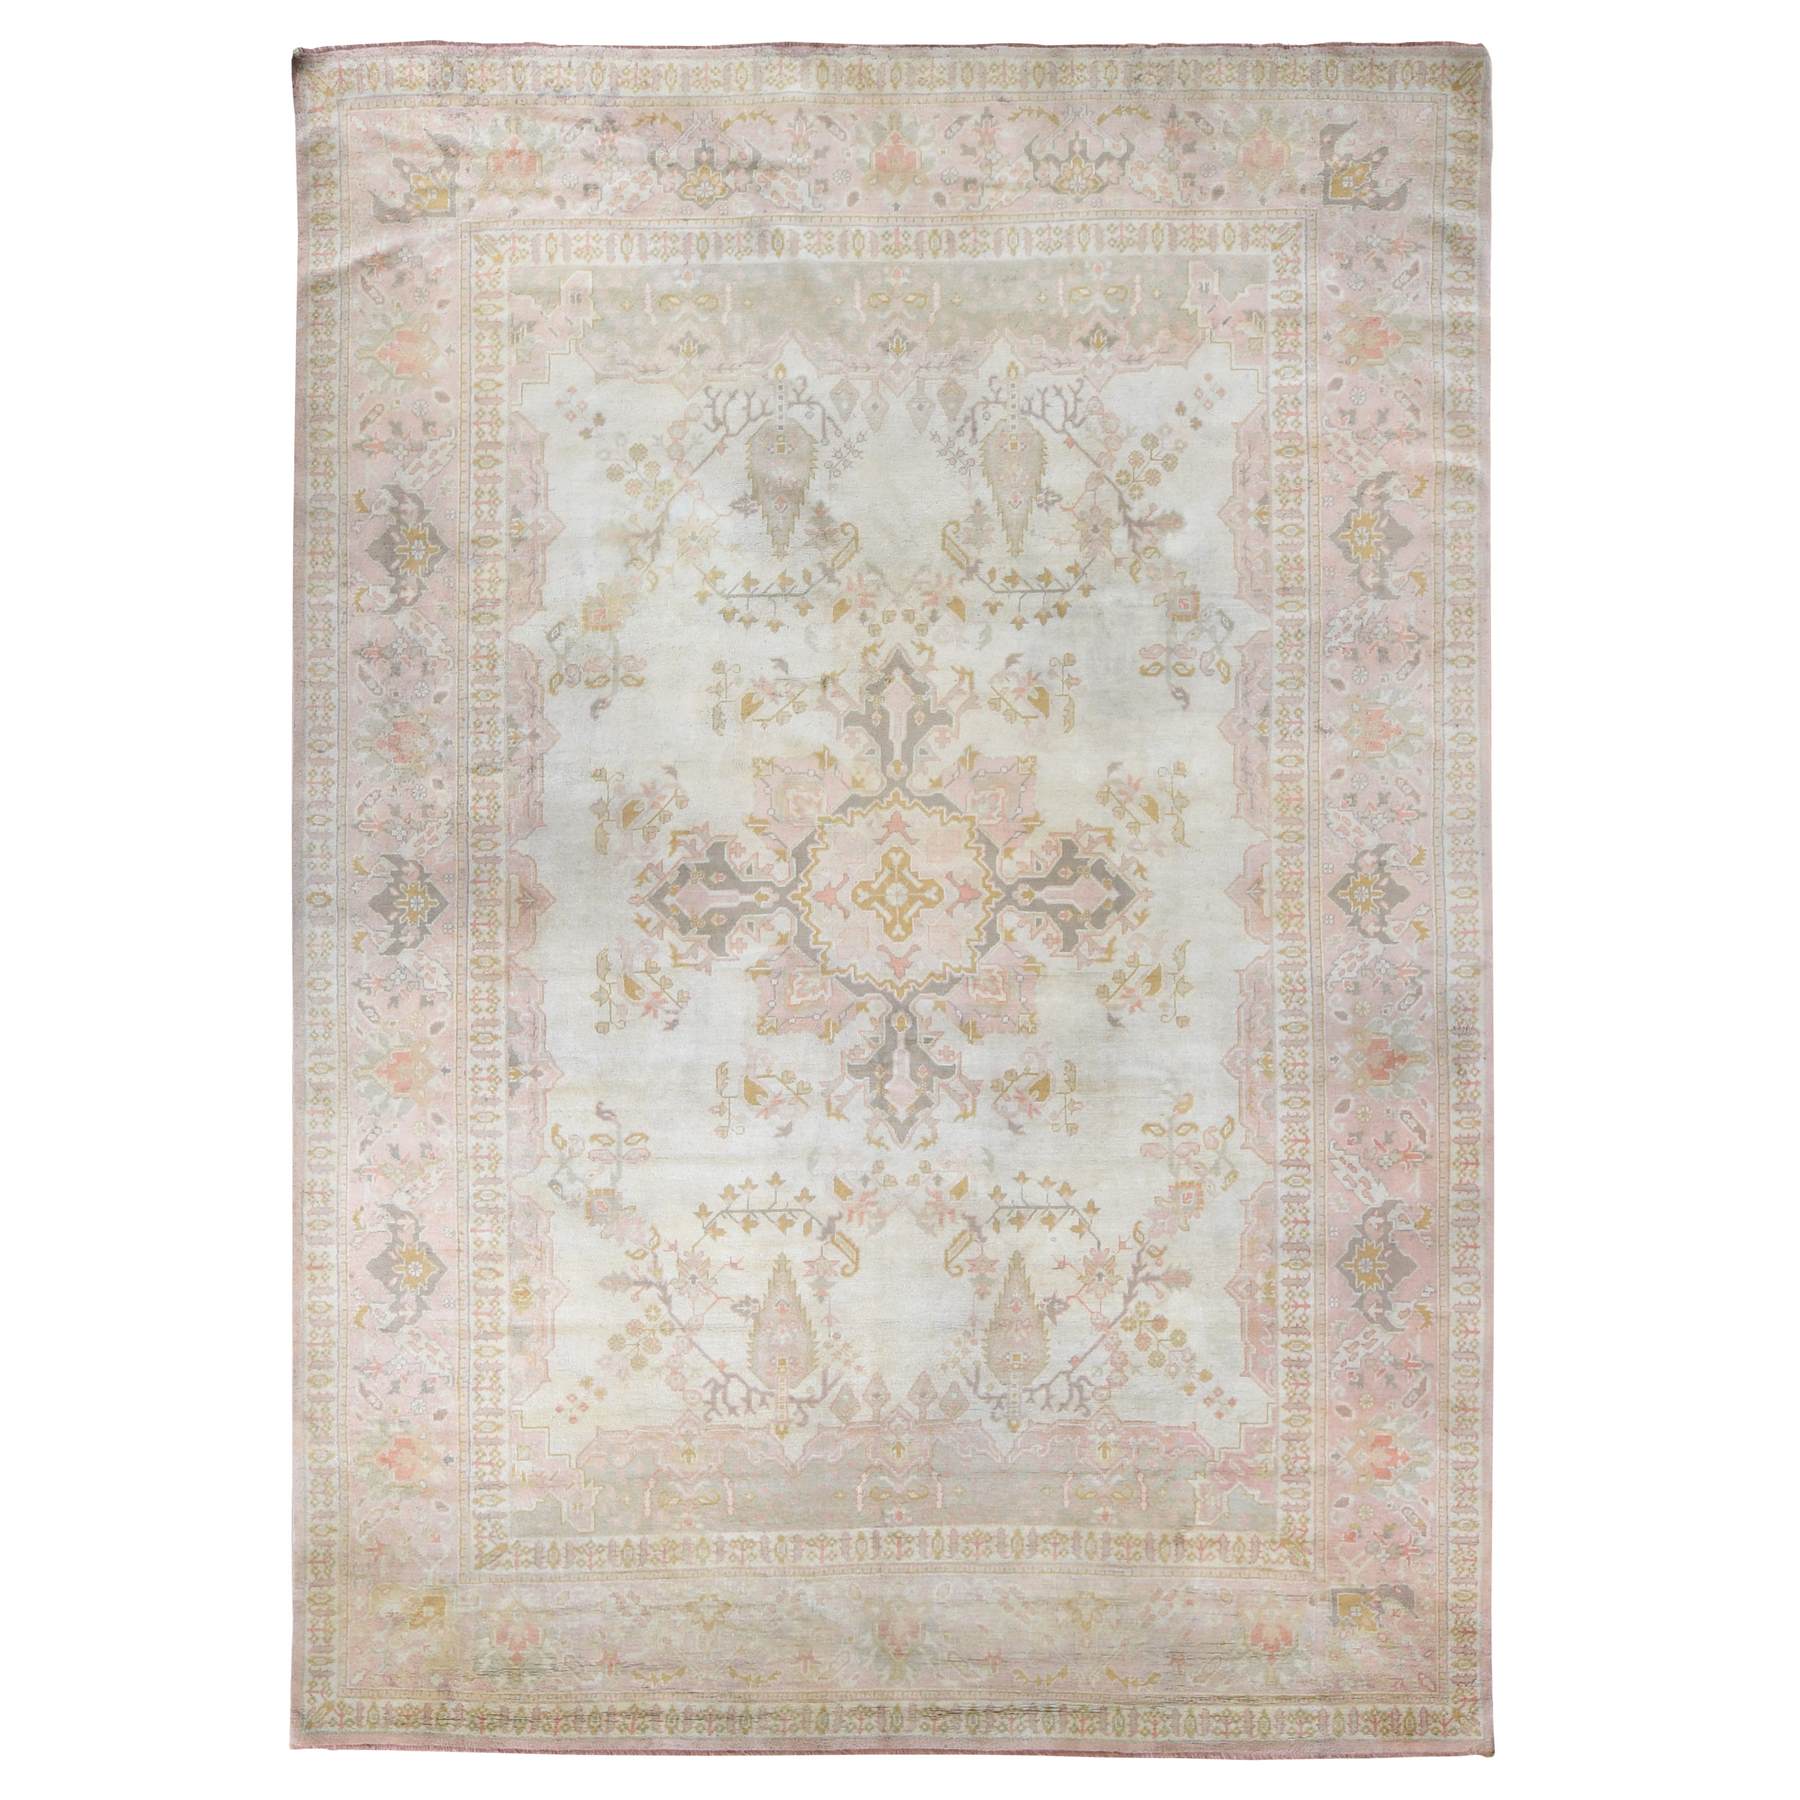 Antique-Hand-Knotted-Rug-403500